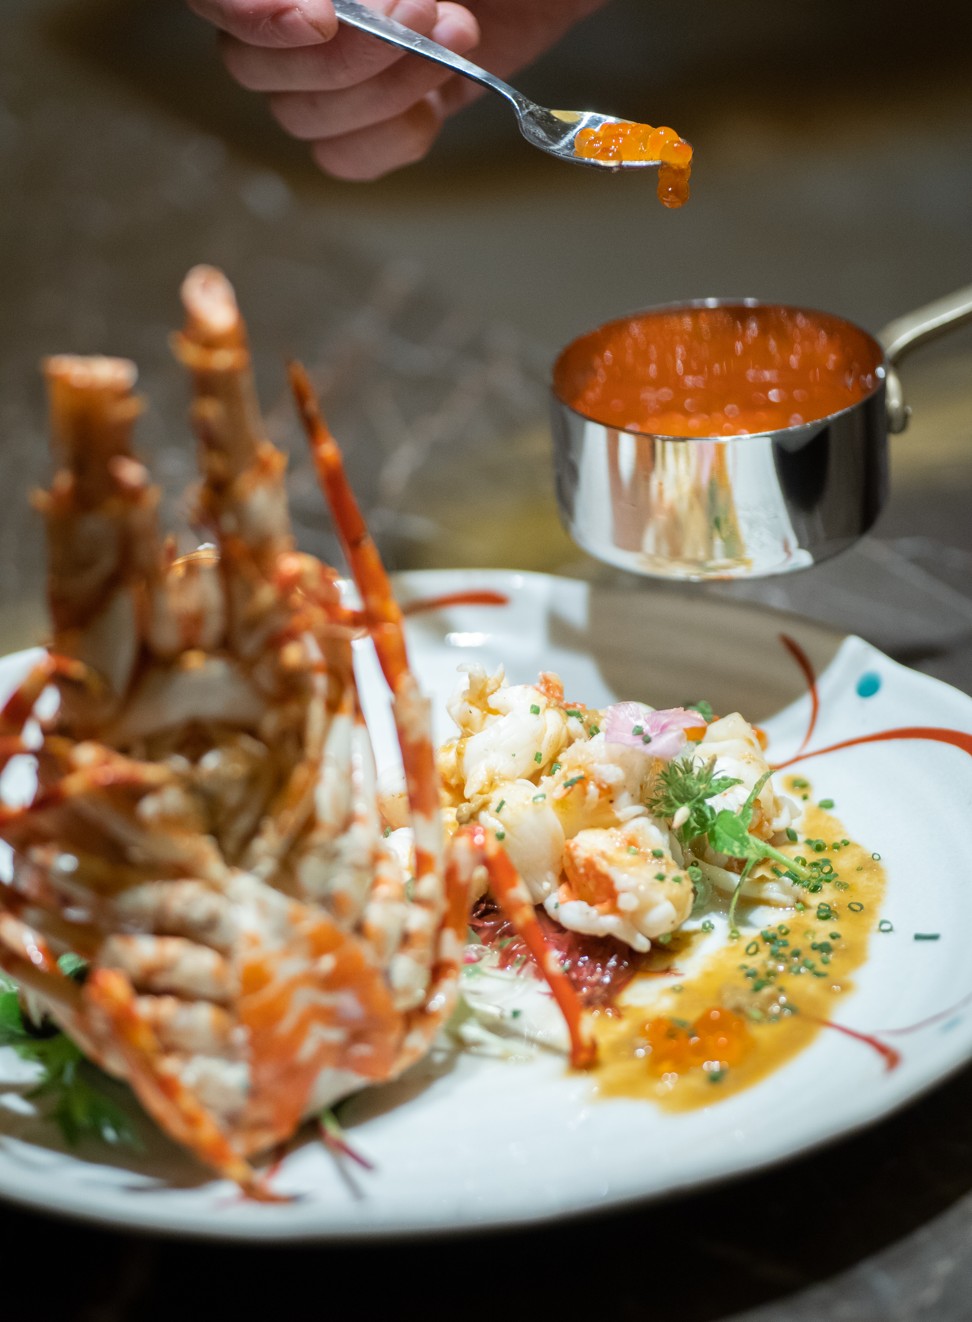 The tender teppanyaki live lobster, which is one of the must-try dishes served at Kakure in Landmark Prince’s in Central